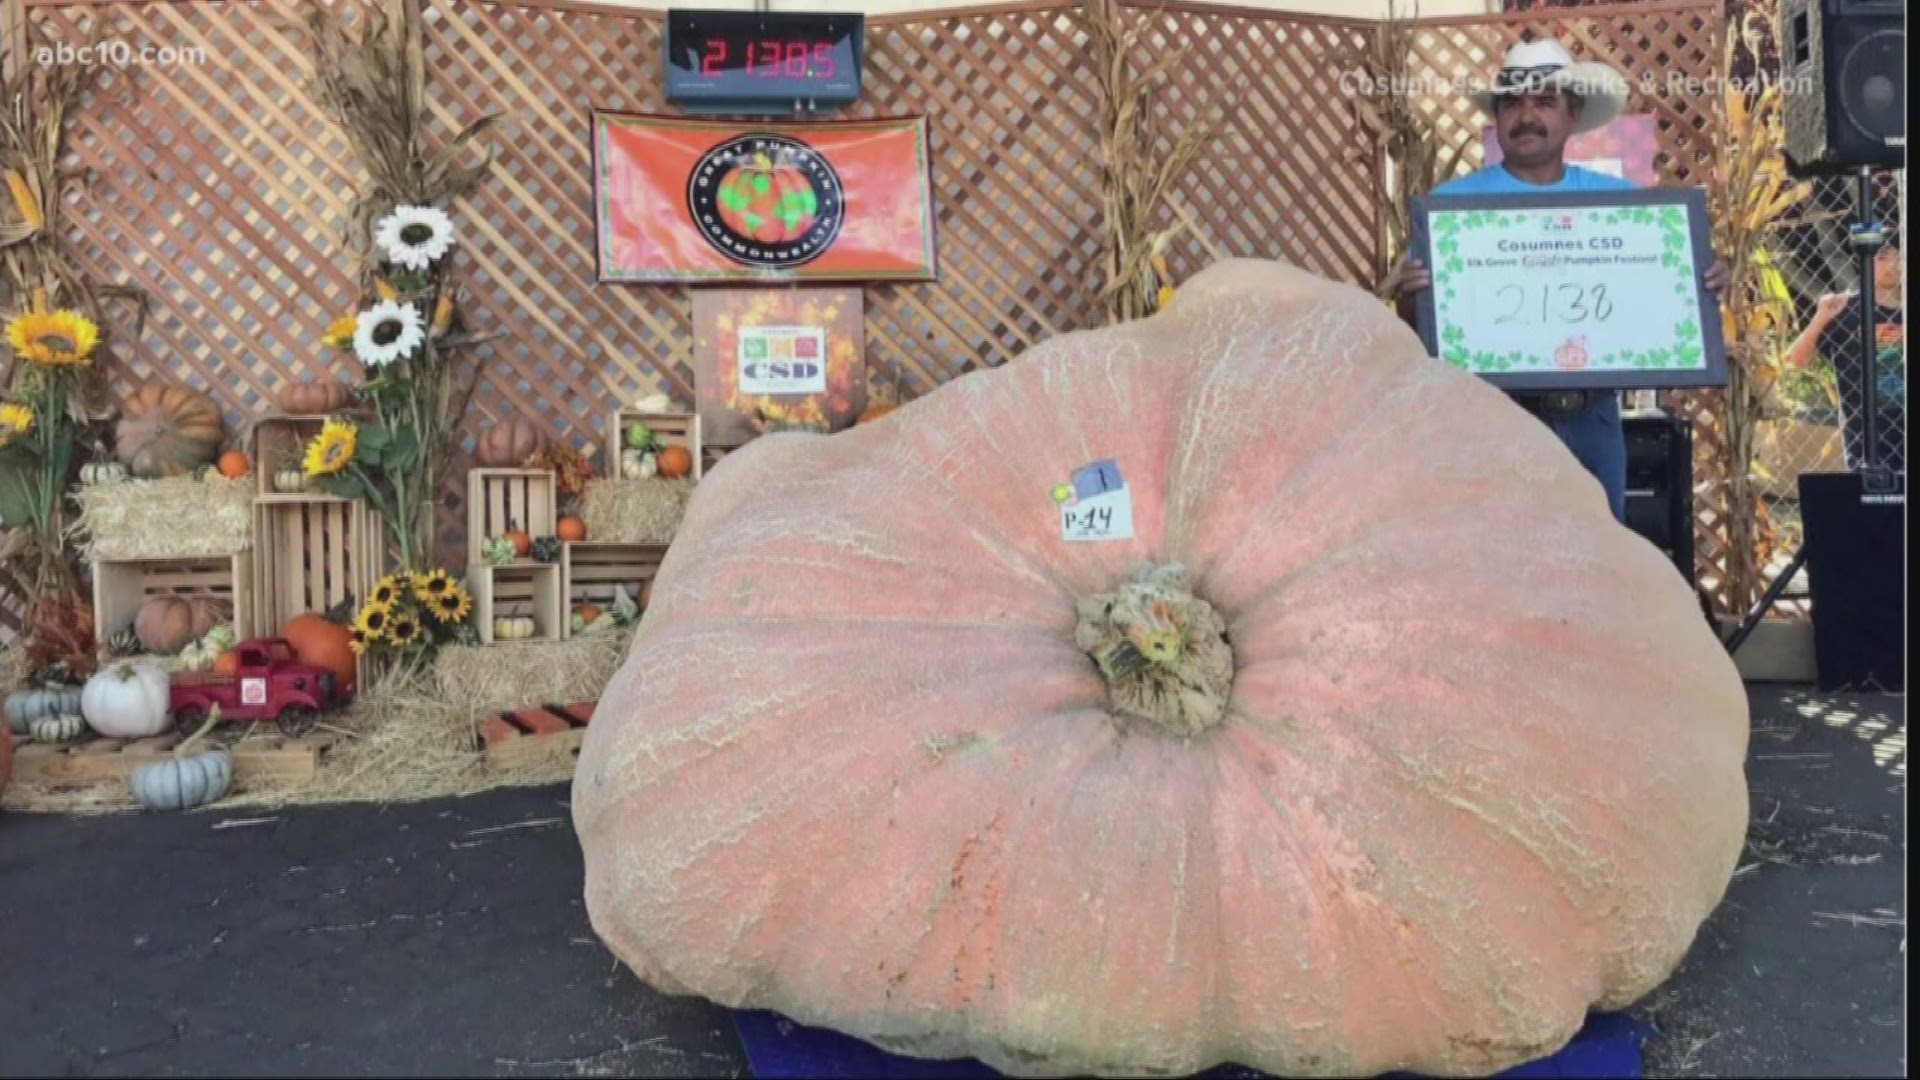 This year's Elk Grove Giant Pumpkin Festival lived up to it's name.